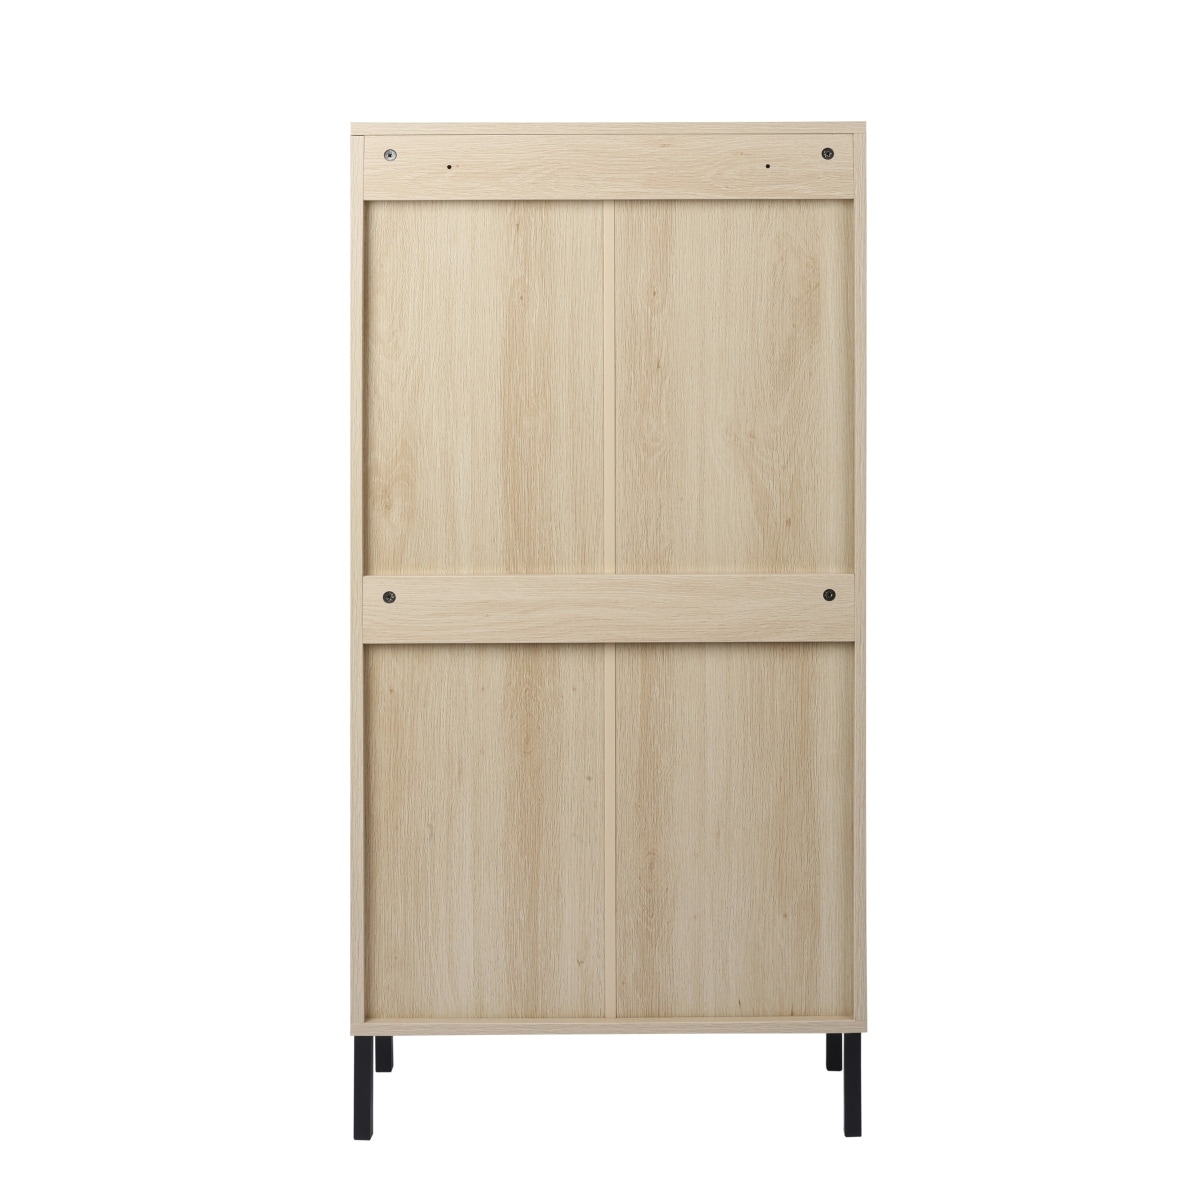 https://ak1.ostkcdn.com/images/products/is/images/direct/d536f5bc1f17cafde5456083f561594e45cd75cd/Shoe-Cabinet-with-3-Flip-Drawers-for-Entryway%2C-Modern-Shoe-Storage-Cabinet%2C-Freestanding-Shoe-Rack-Storage-Organizer.jpg